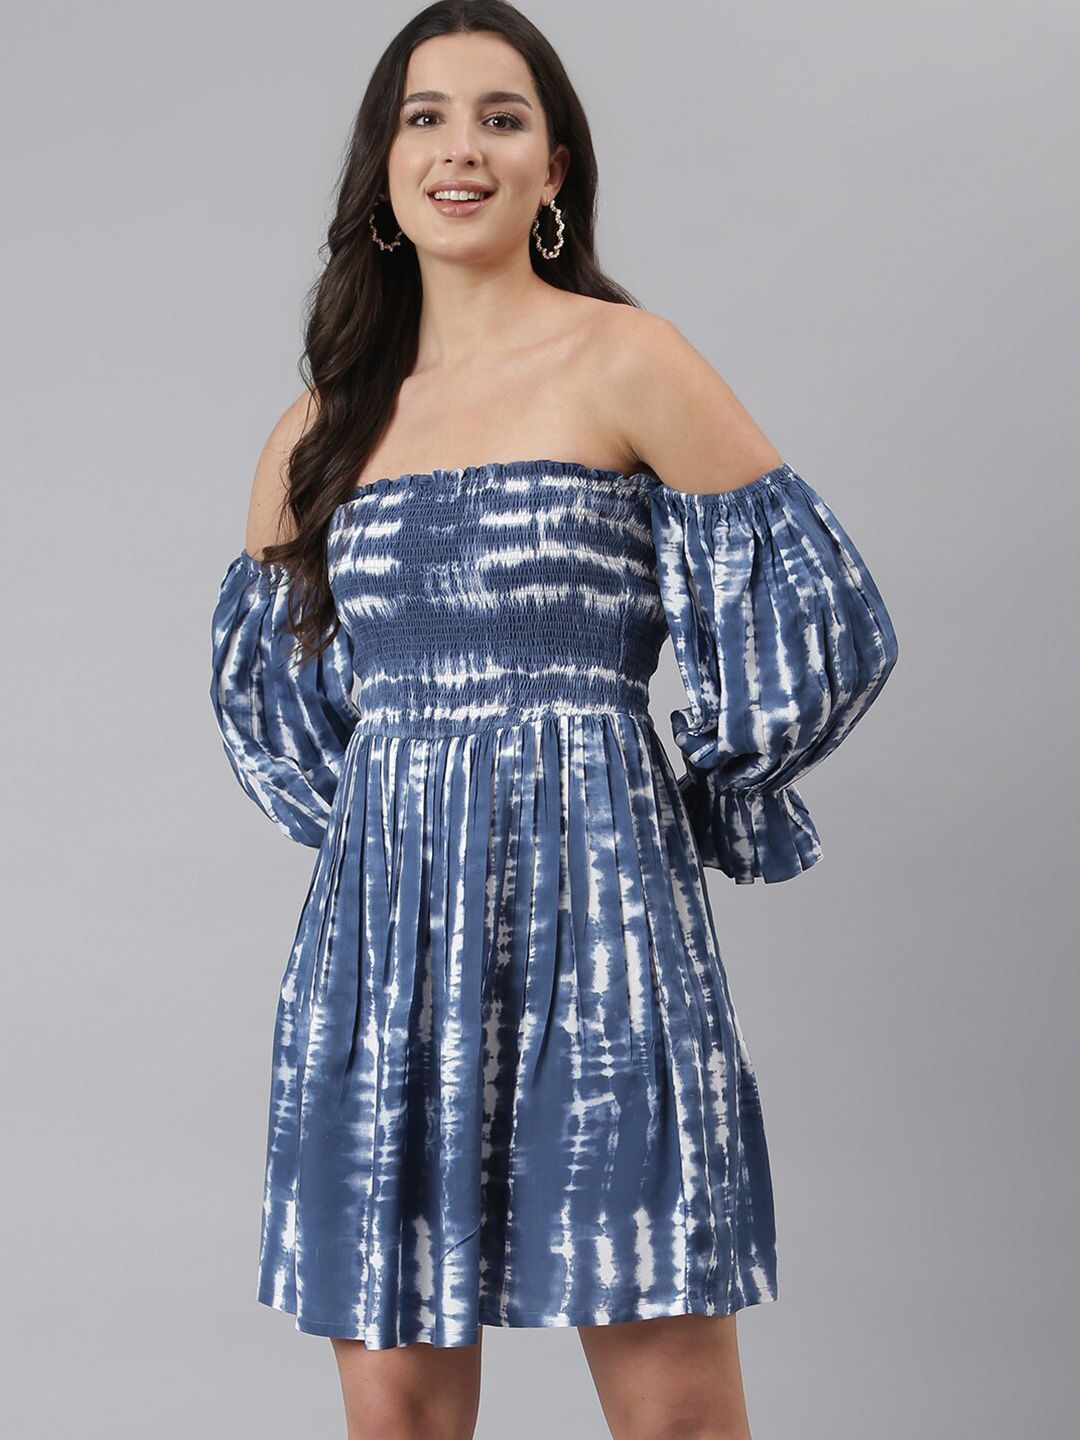 DEEBACO Blue & White Tie and Dye Off-Shoulder Dress Price in India